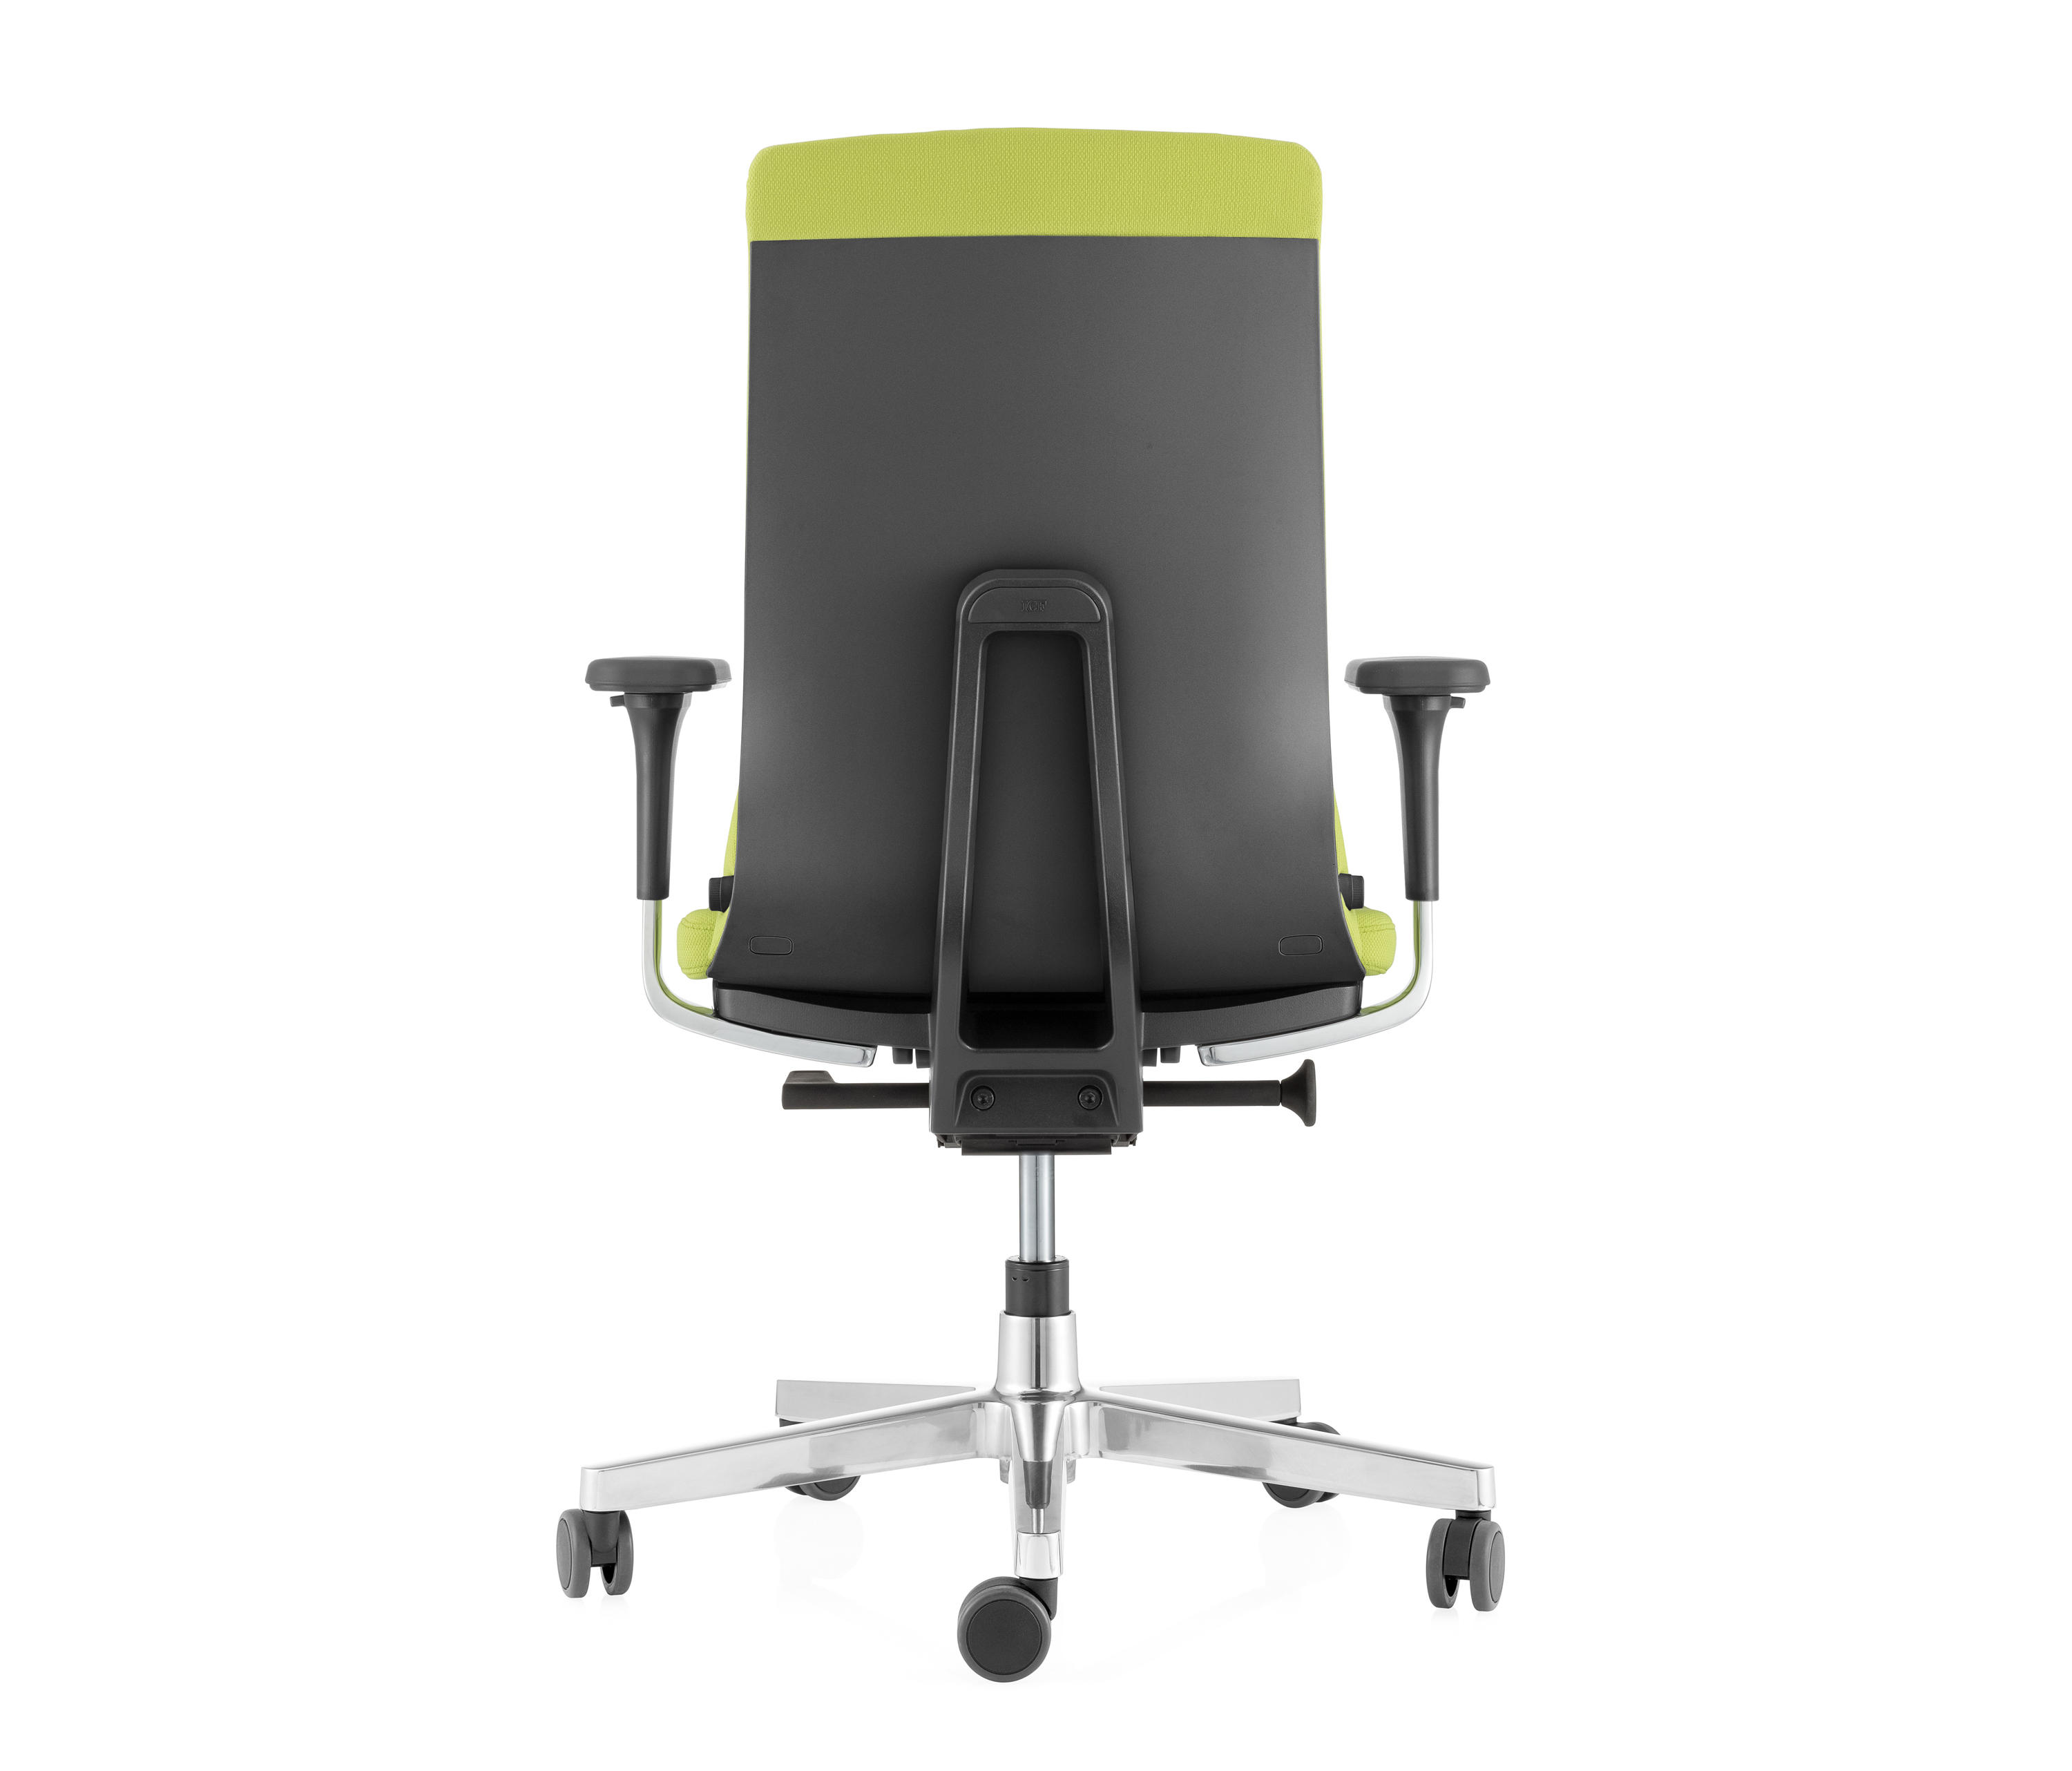 Pyla Tech Office Chairs From Icf Architonic